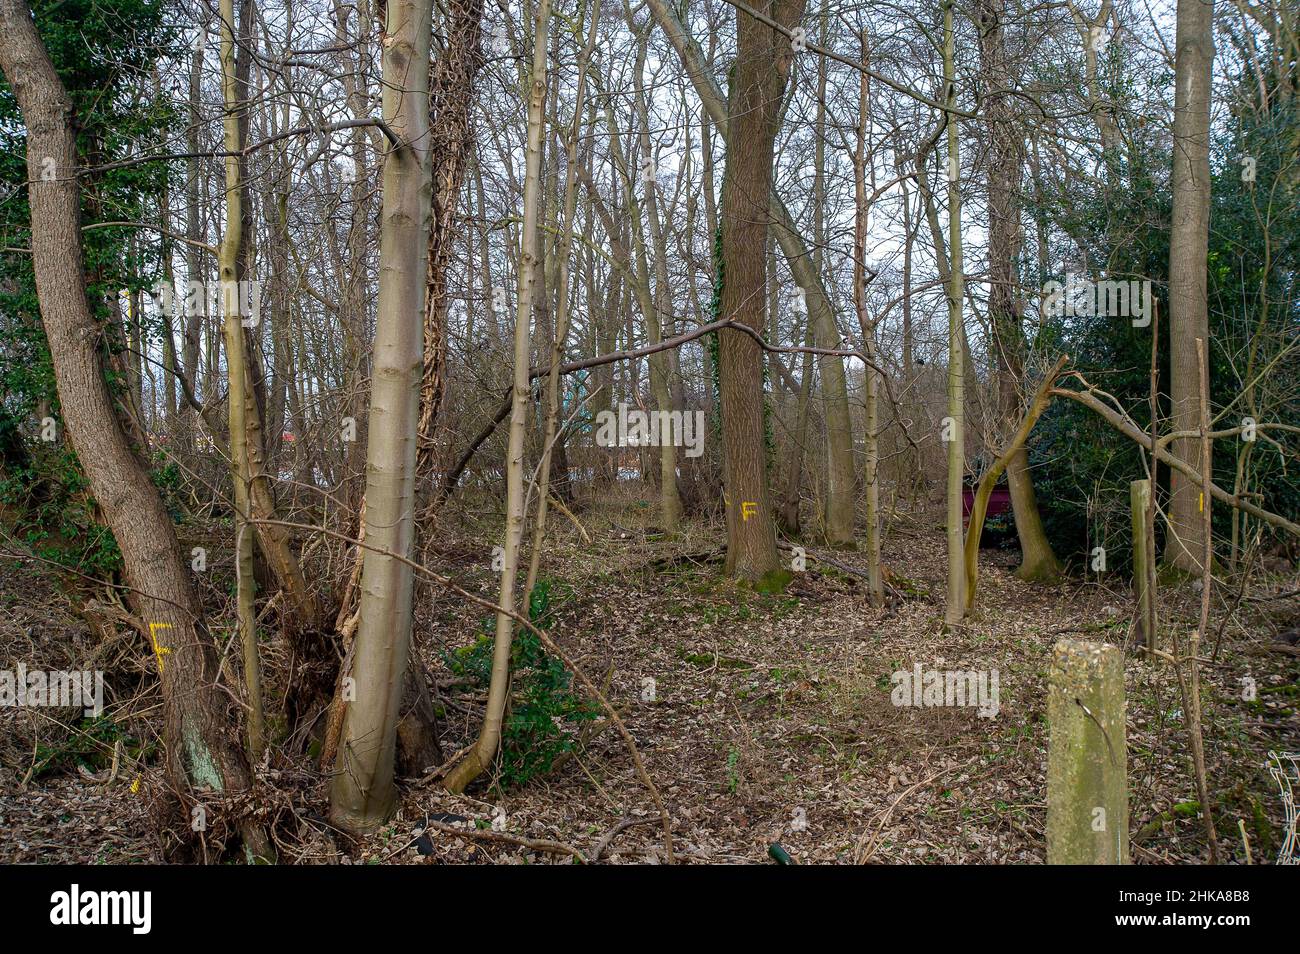 Harefield, Uxbridge, UK. 2nd February, 2022. More trees marked up for felling by HS2. The High Speed 2 rail project is having a devasting impact upon woodlands and wildlife habitats. Credit: Maureen McLean/Alamy Stock Photo